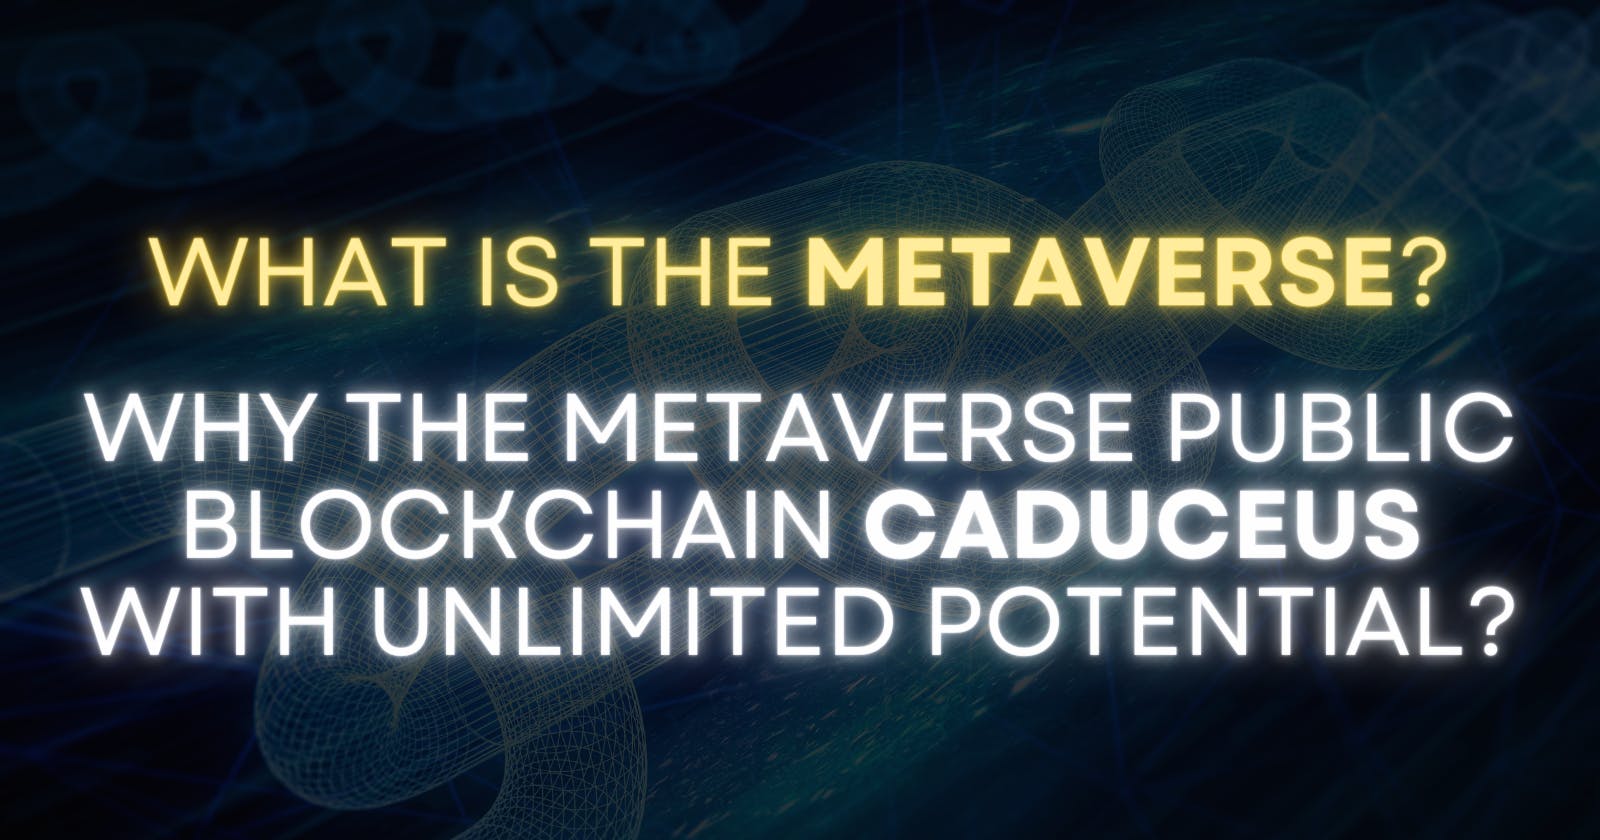 Tech Talk-What is the Metaverse? Why the Metaverse public blockchain Caduceus with unlimited potential?